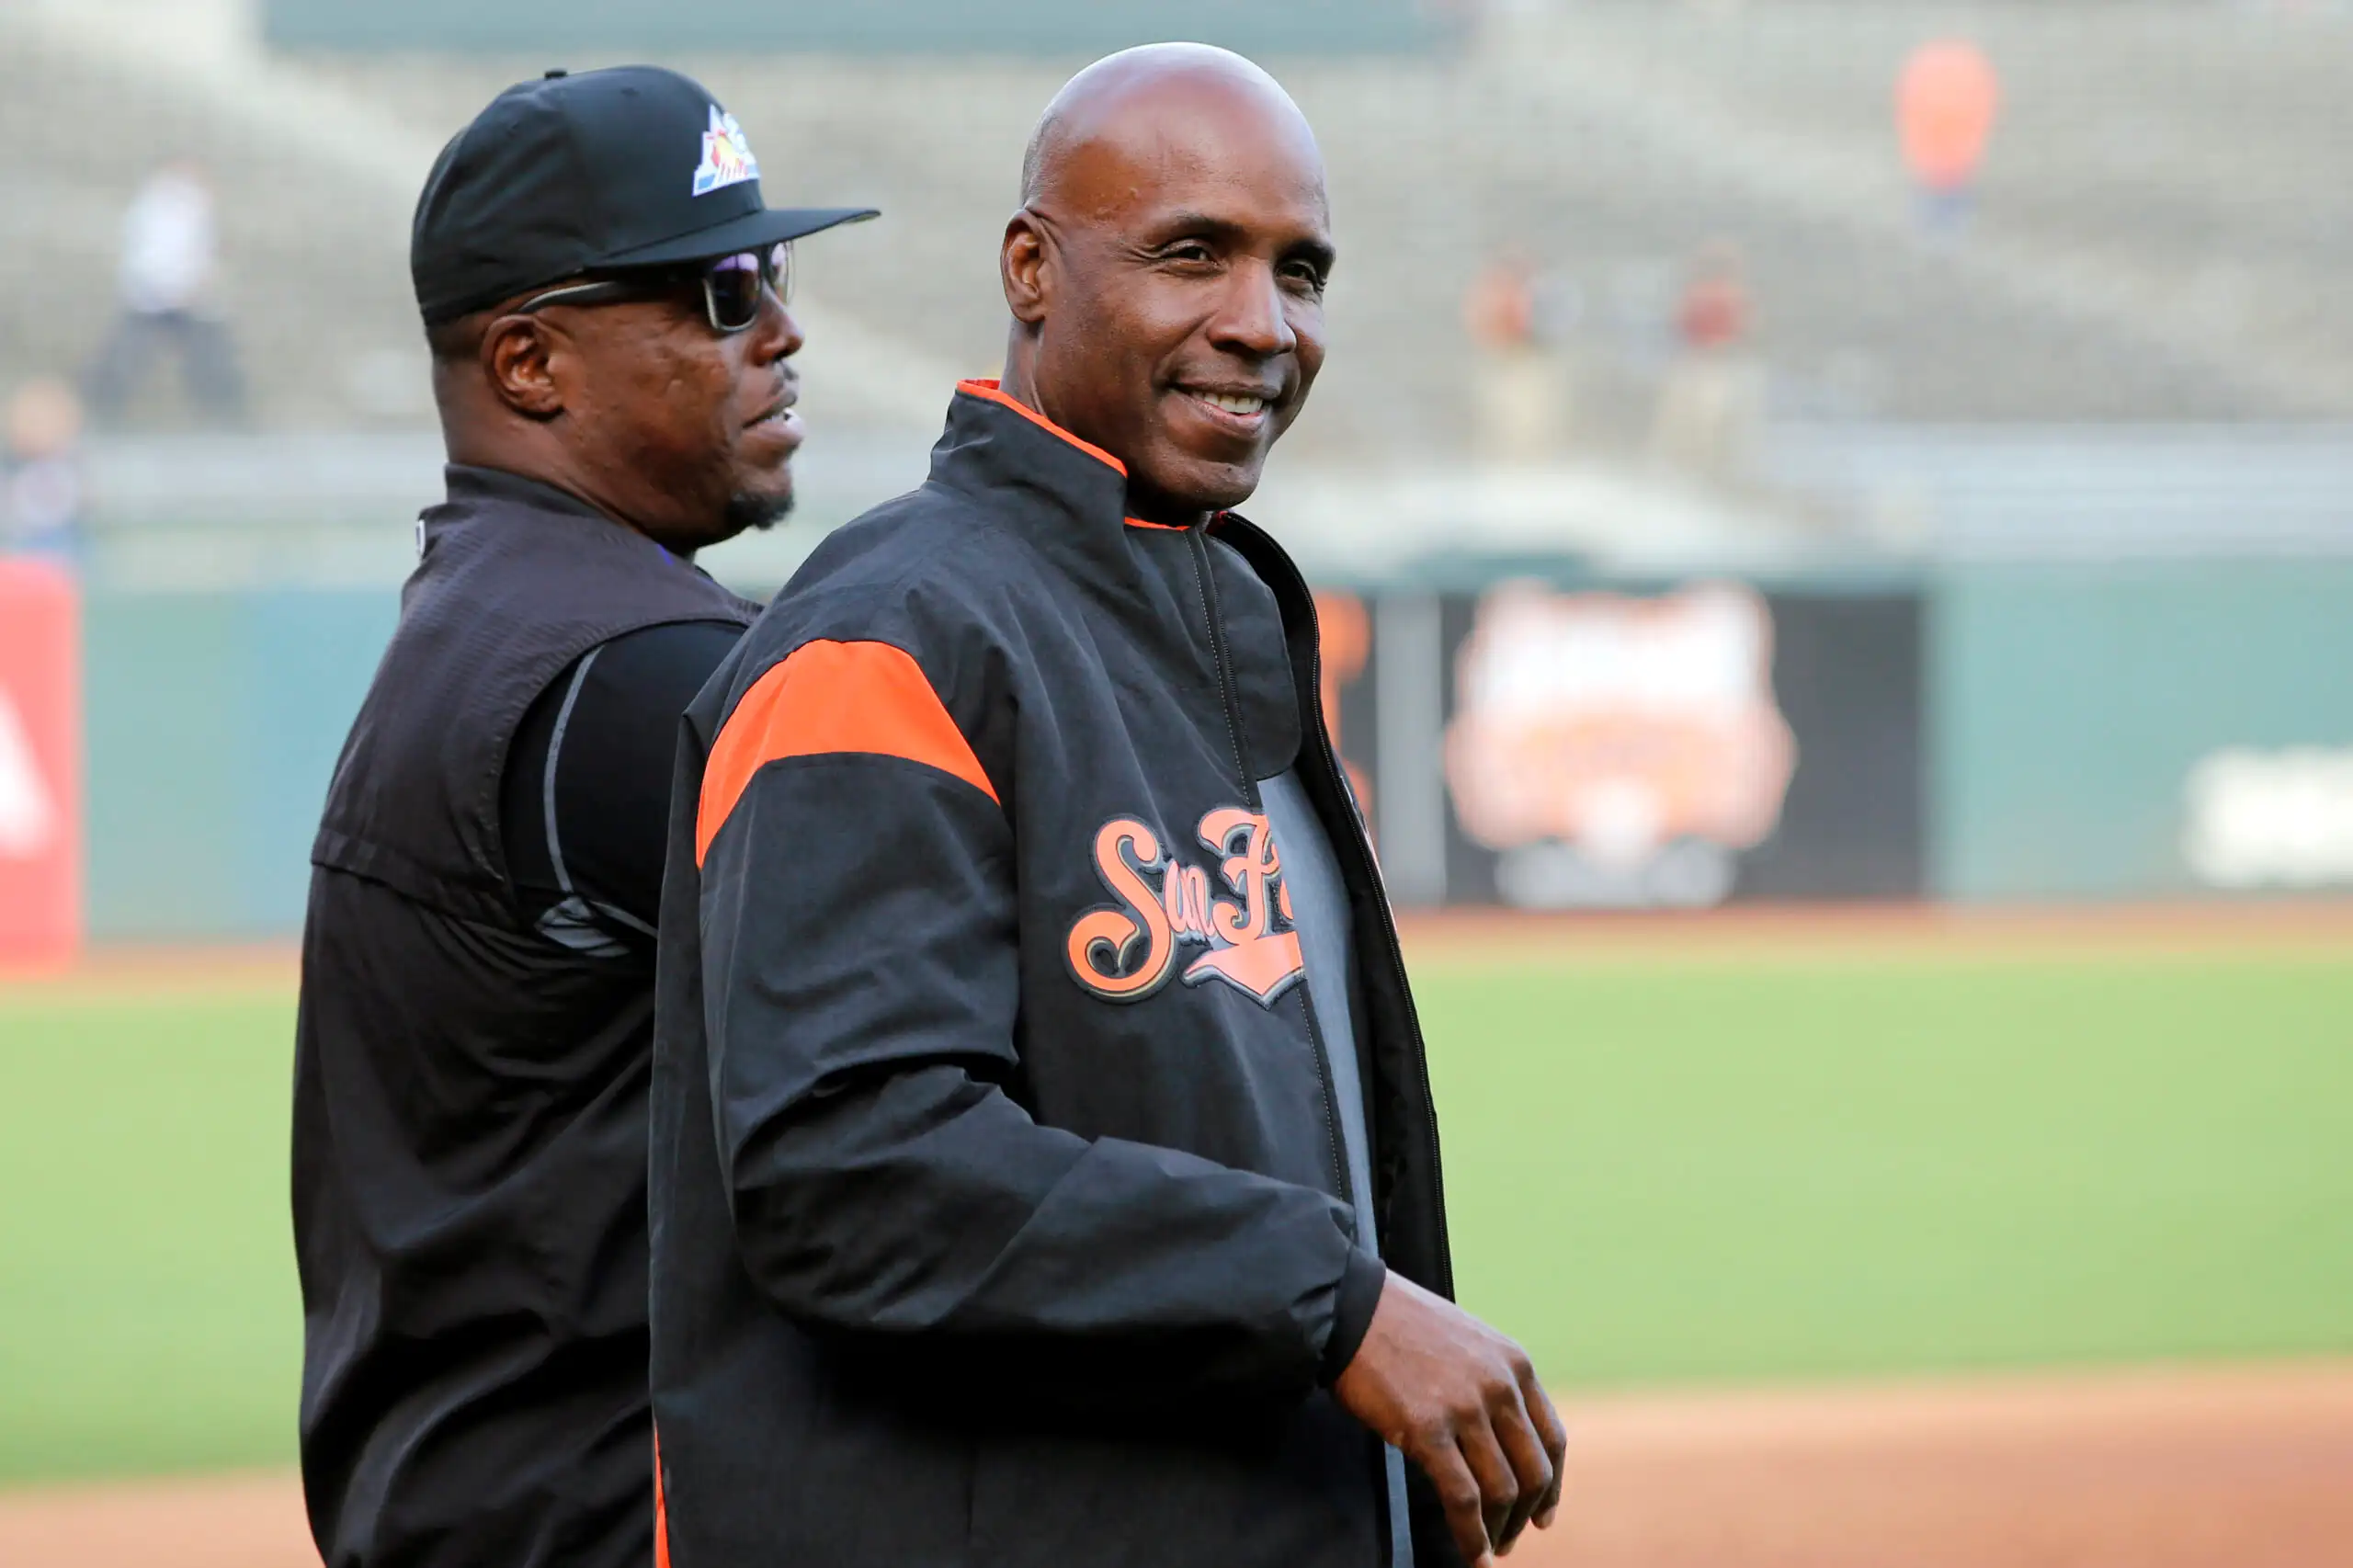 Barry Bonds snubbed from Hall of Fame: Baseball world reacts